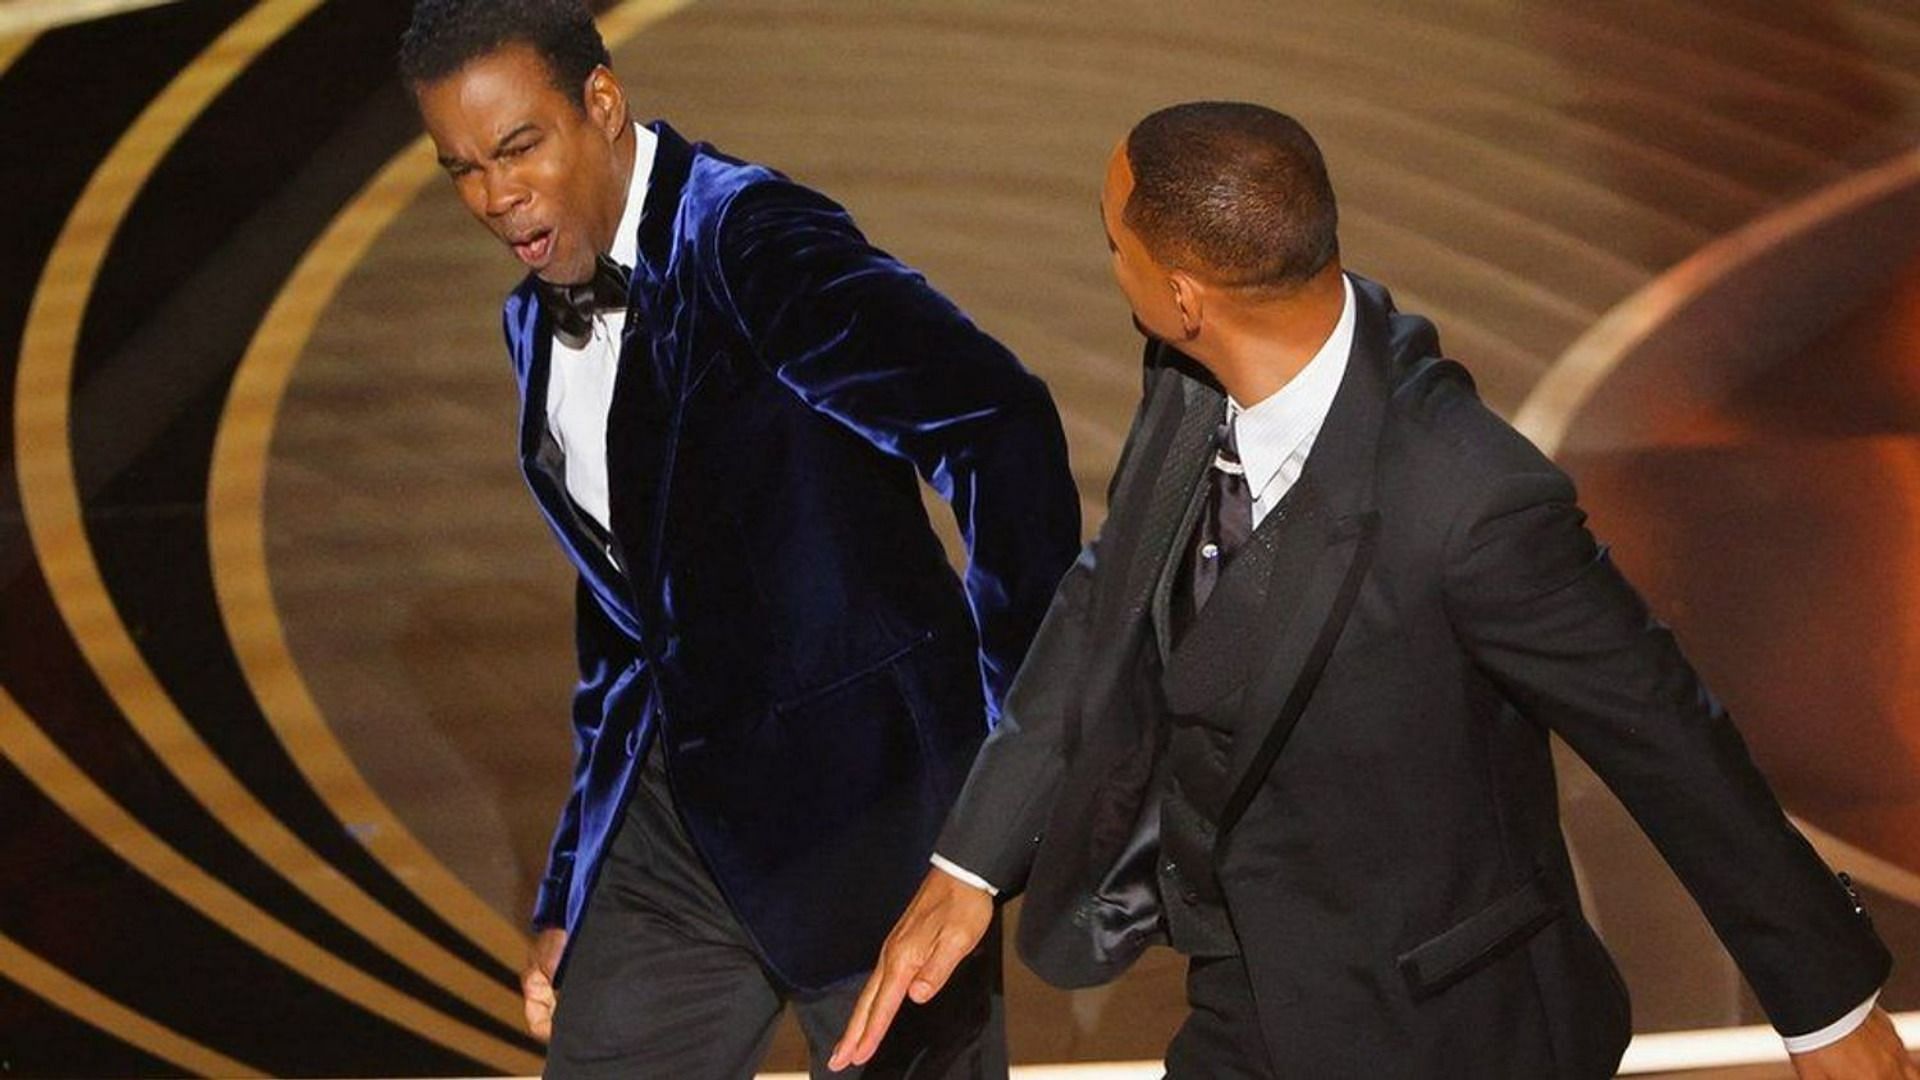 Will Smith punches Chris Rock during Oscars live ceremony (Image via Getty Images)